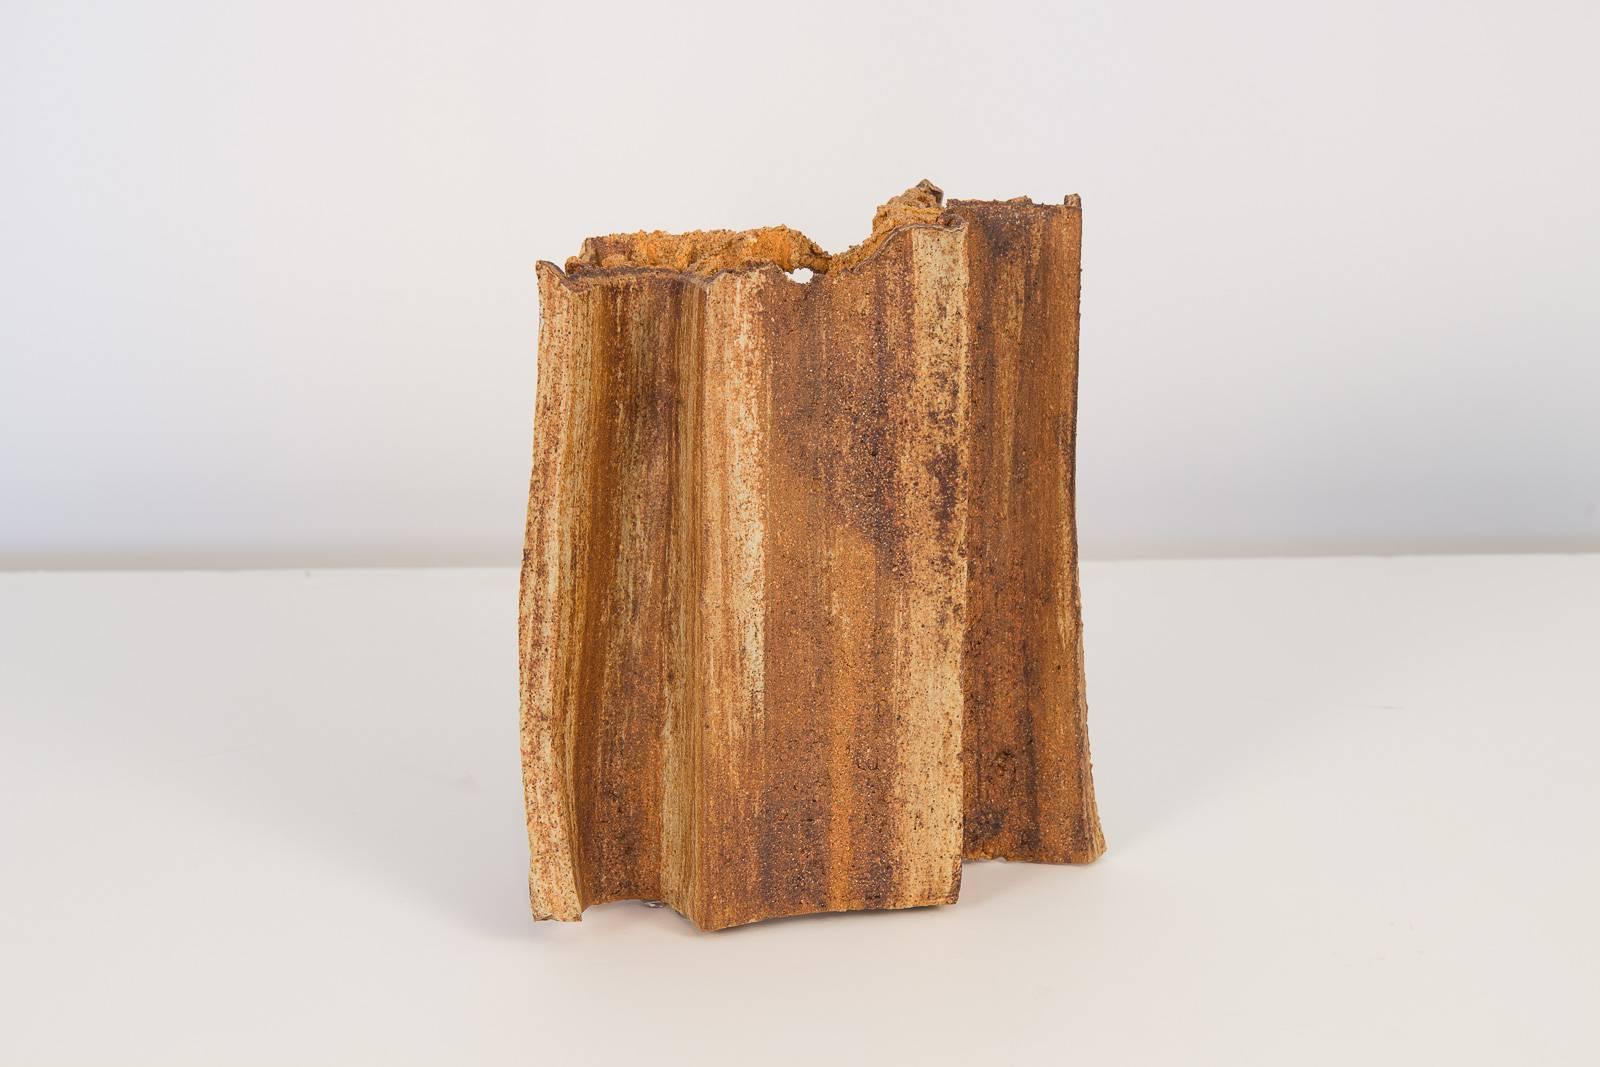 Abstract ceramic sculpture by unknown artist. Alluding to a fragmented steel beam of refuse, this dystopic work of art will compliment a room with it's coarse texture and weathered form. Plastic padding affixed to the base of the sculpture for